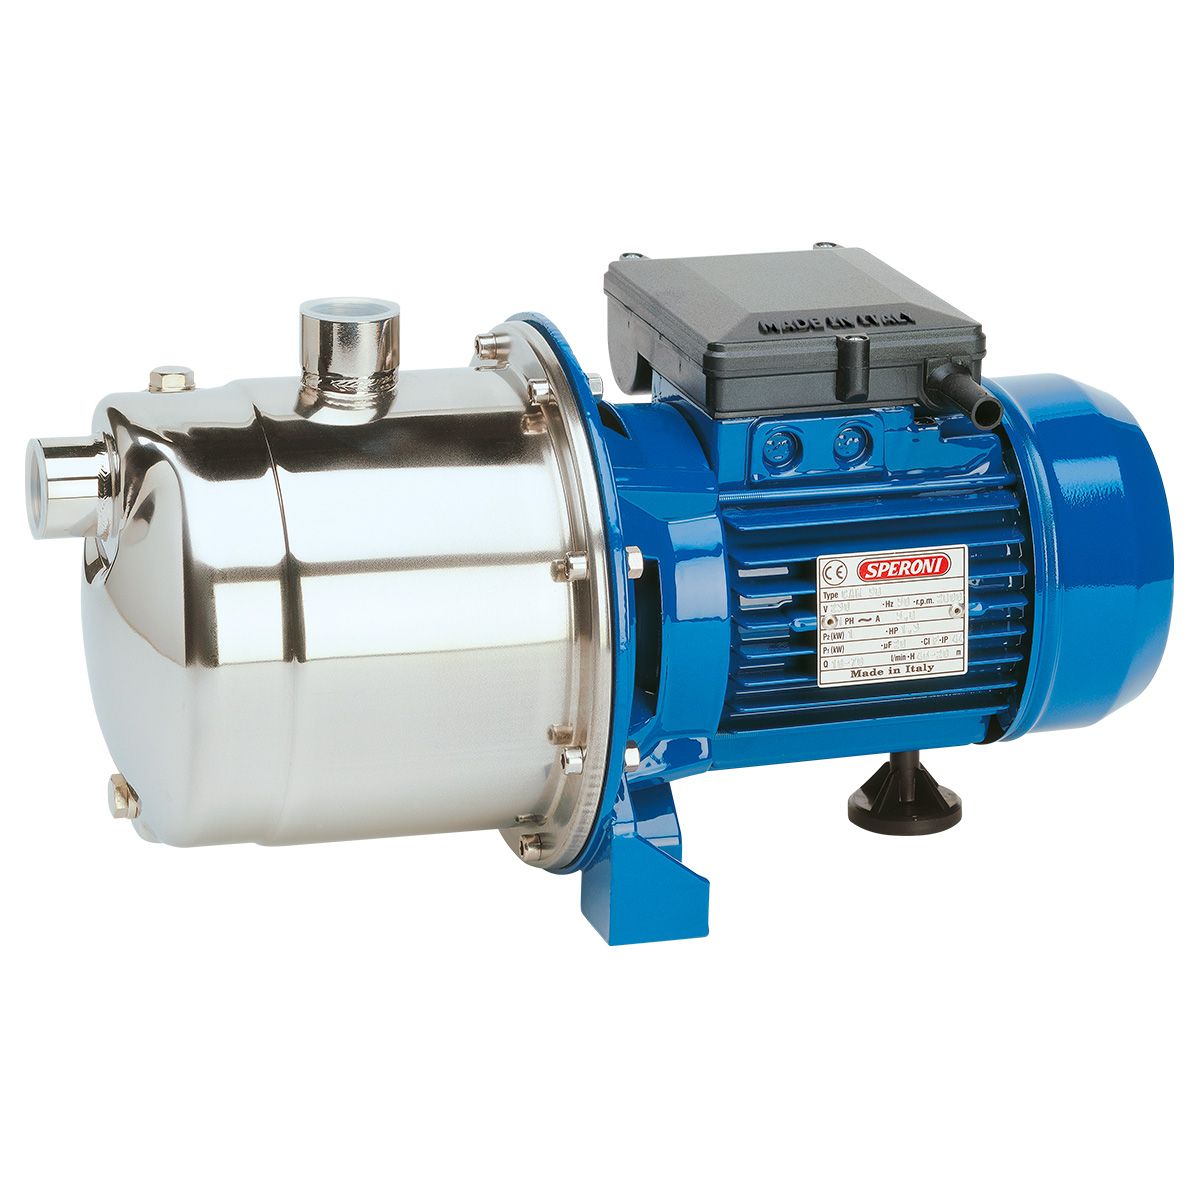 Buy shallow water pump Online in Angola at Low Prices at desertcart